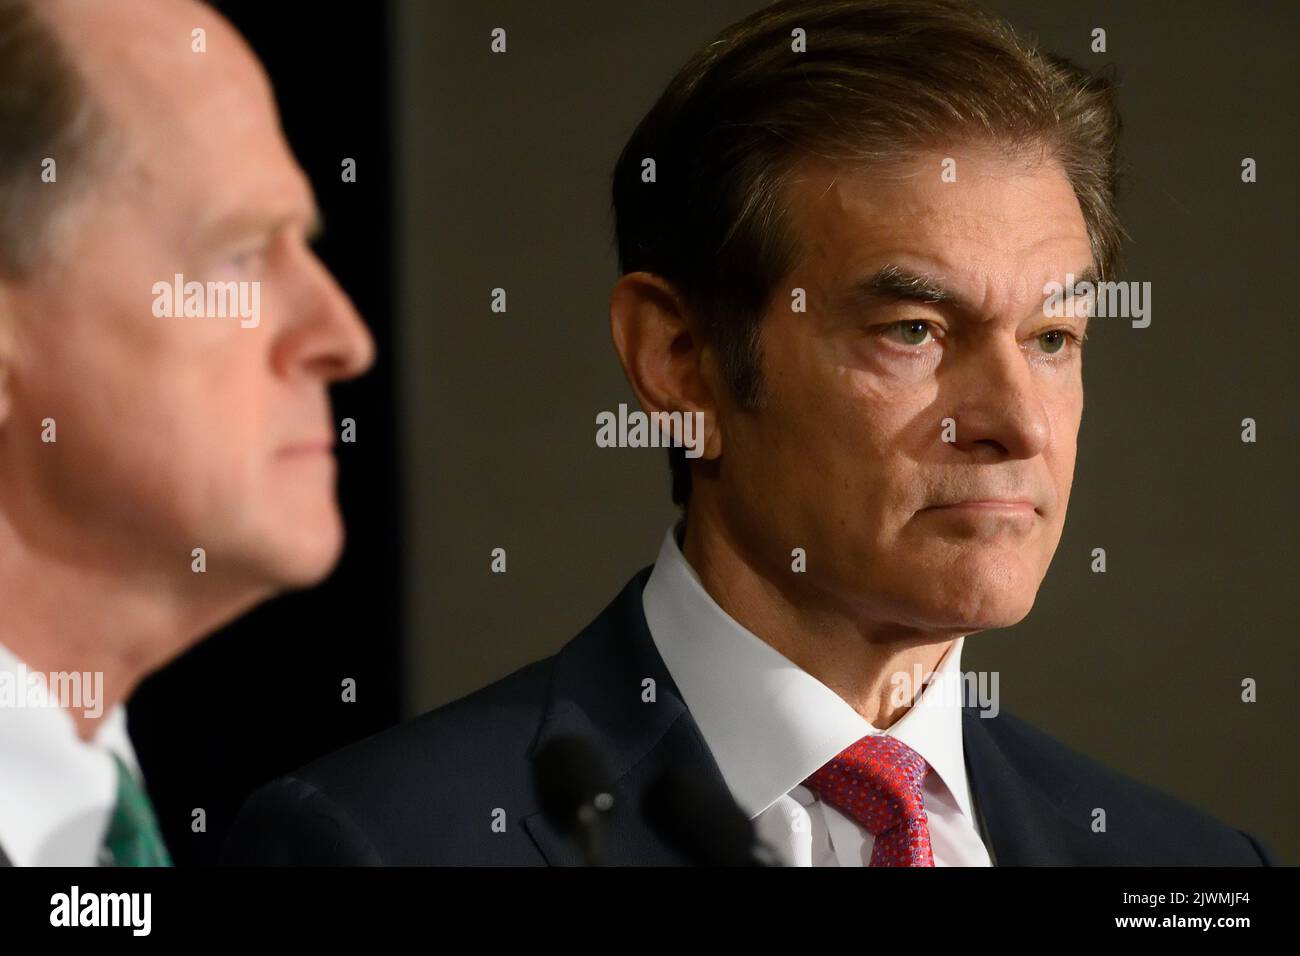 Philadelphia, United States. 06th Sep, 2022. Dr. Mehmet Oz, Republican candidate for the Pennsylvania U.S. Senate, sided by U.S. Senator Pat Toomey (R-PA) discus TV Debate availability of himself and Democratic candidate John Fetterman, during a press conference in Philadelphia, PA, USA, on September 6, 2022. Credit: OOgImages/Alamy Live News Stock Photo